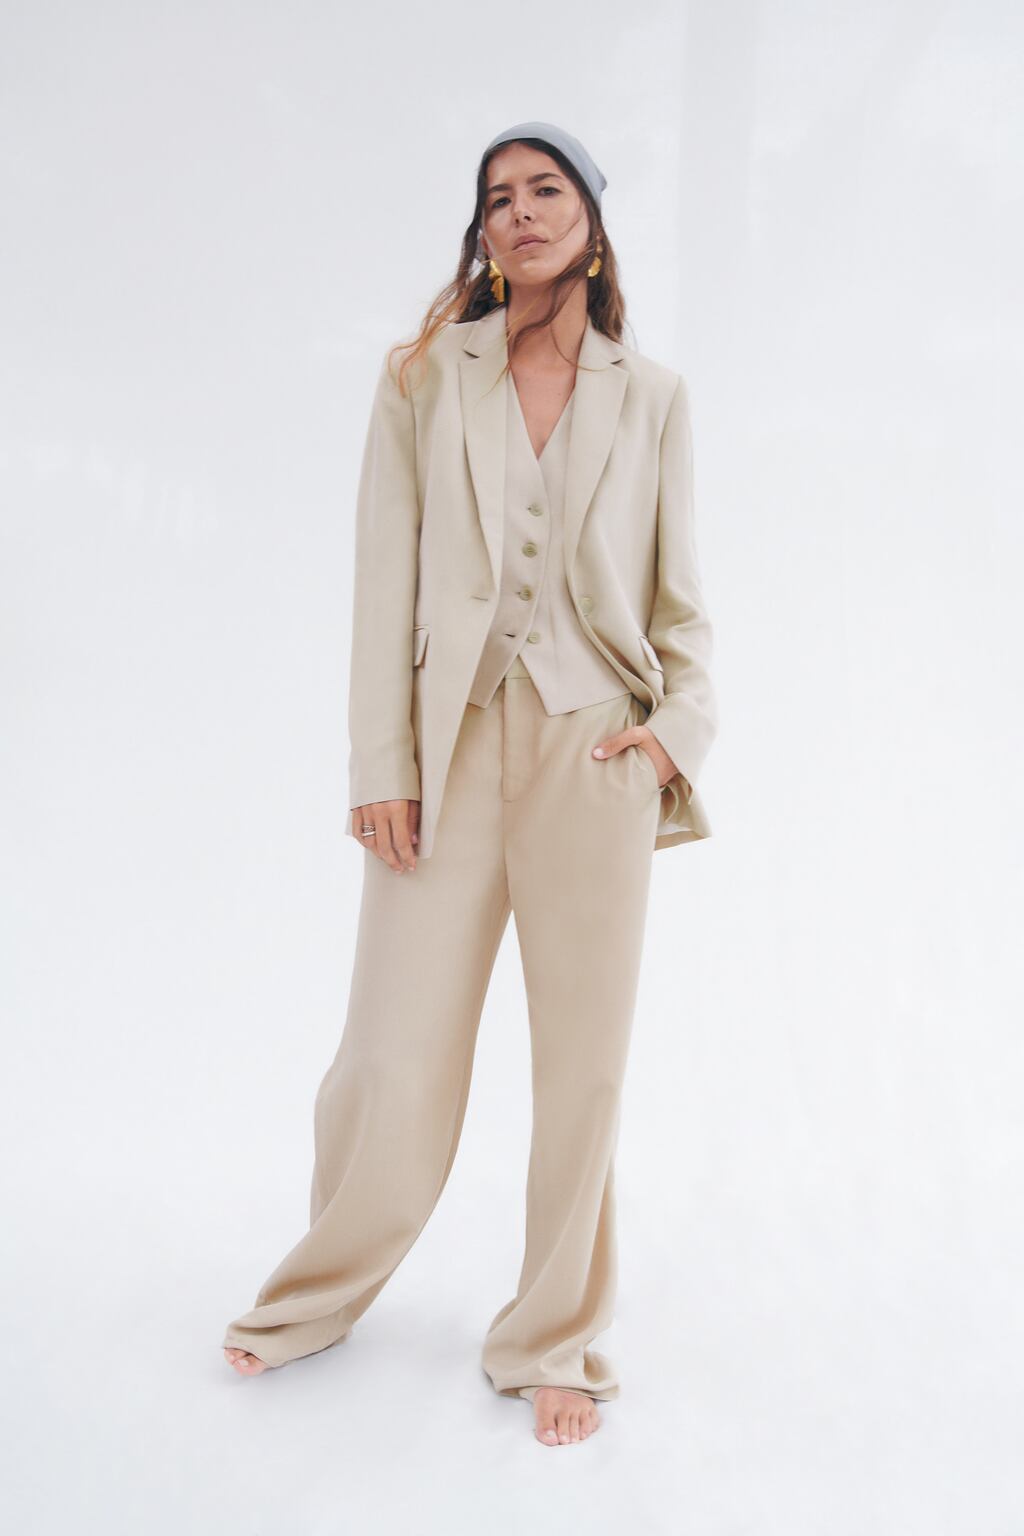 Zara suit - STRAIGHT FIT SINGLE-BUTTON BLAZER and FLOWING WIDE-LEG TROUSERS